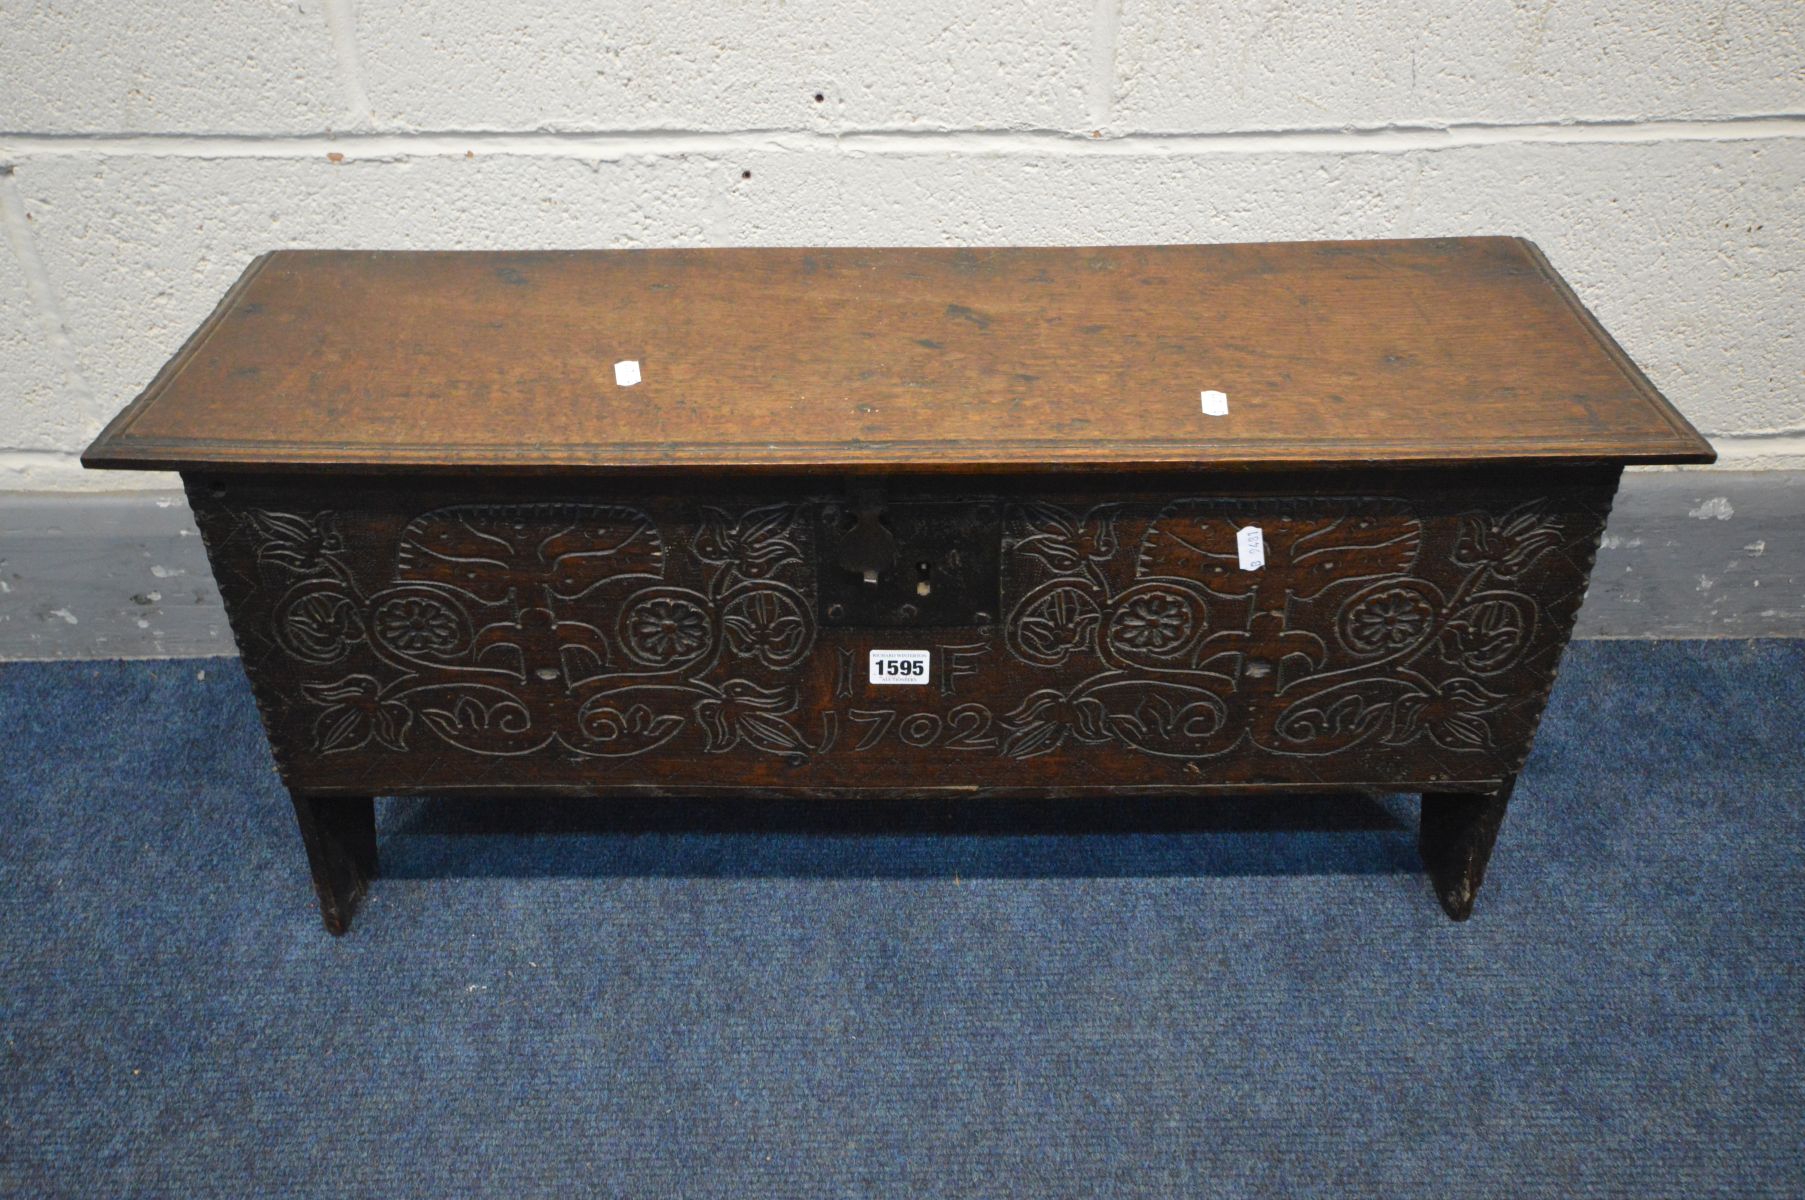 AN EARLY 18TH CENTURY OAK SIX PLANK BOARDED CHEST, with a moulded edge and iron hinged lid, and